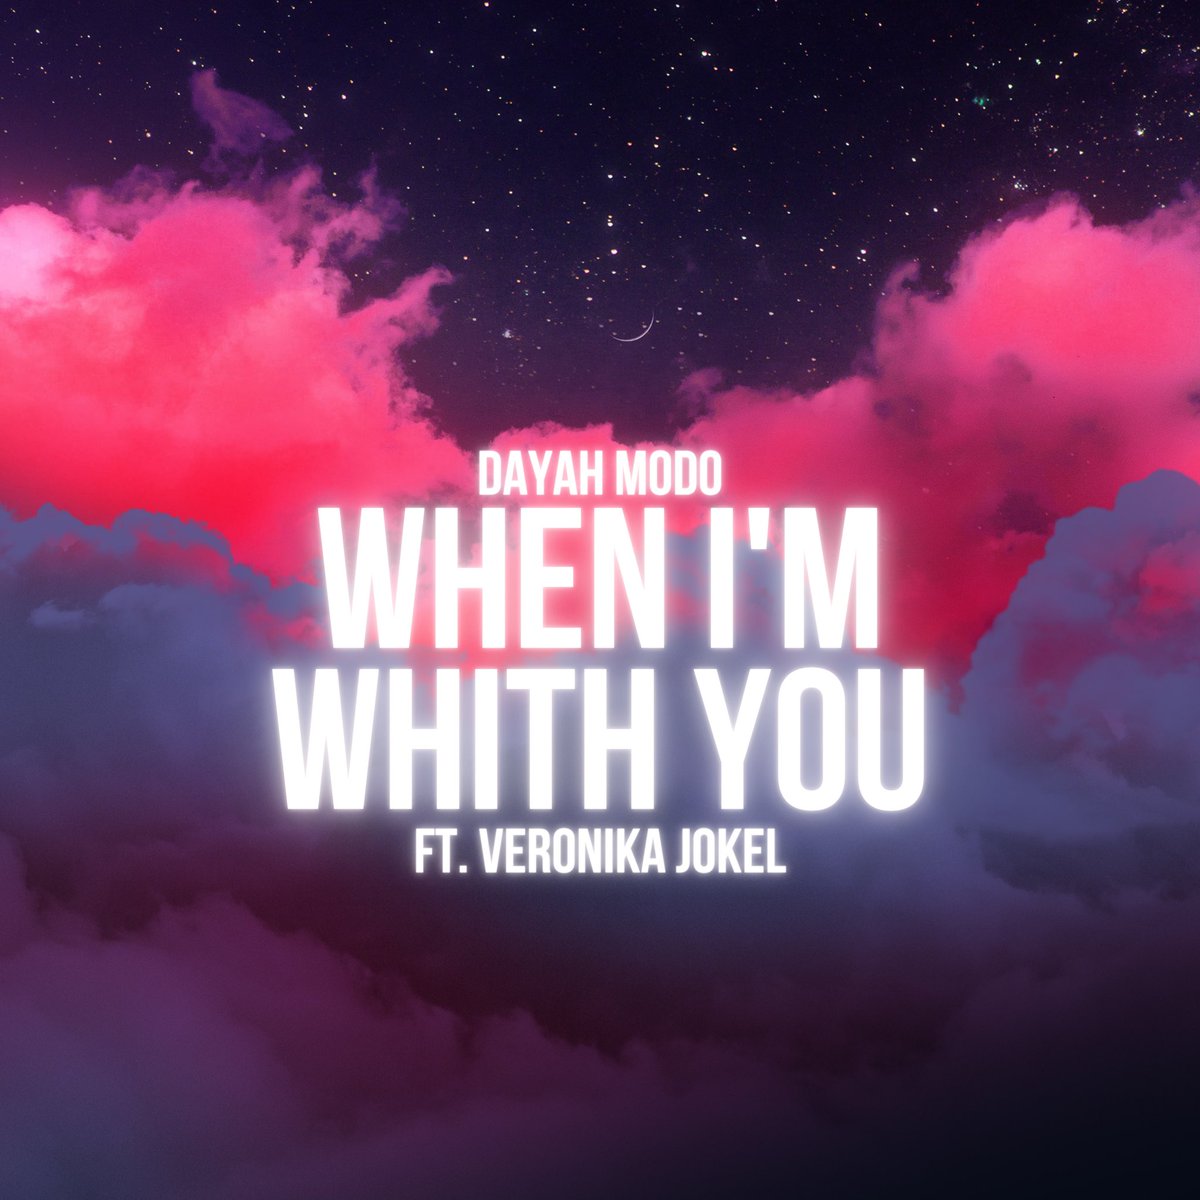 If you did not have the chance to listen to my new single “When I’m With You” ft Veronika Jokel check it out now in all major platforms! #NewRelease #newmusic #deephouse #downtempo #chill #nycdj #nyc